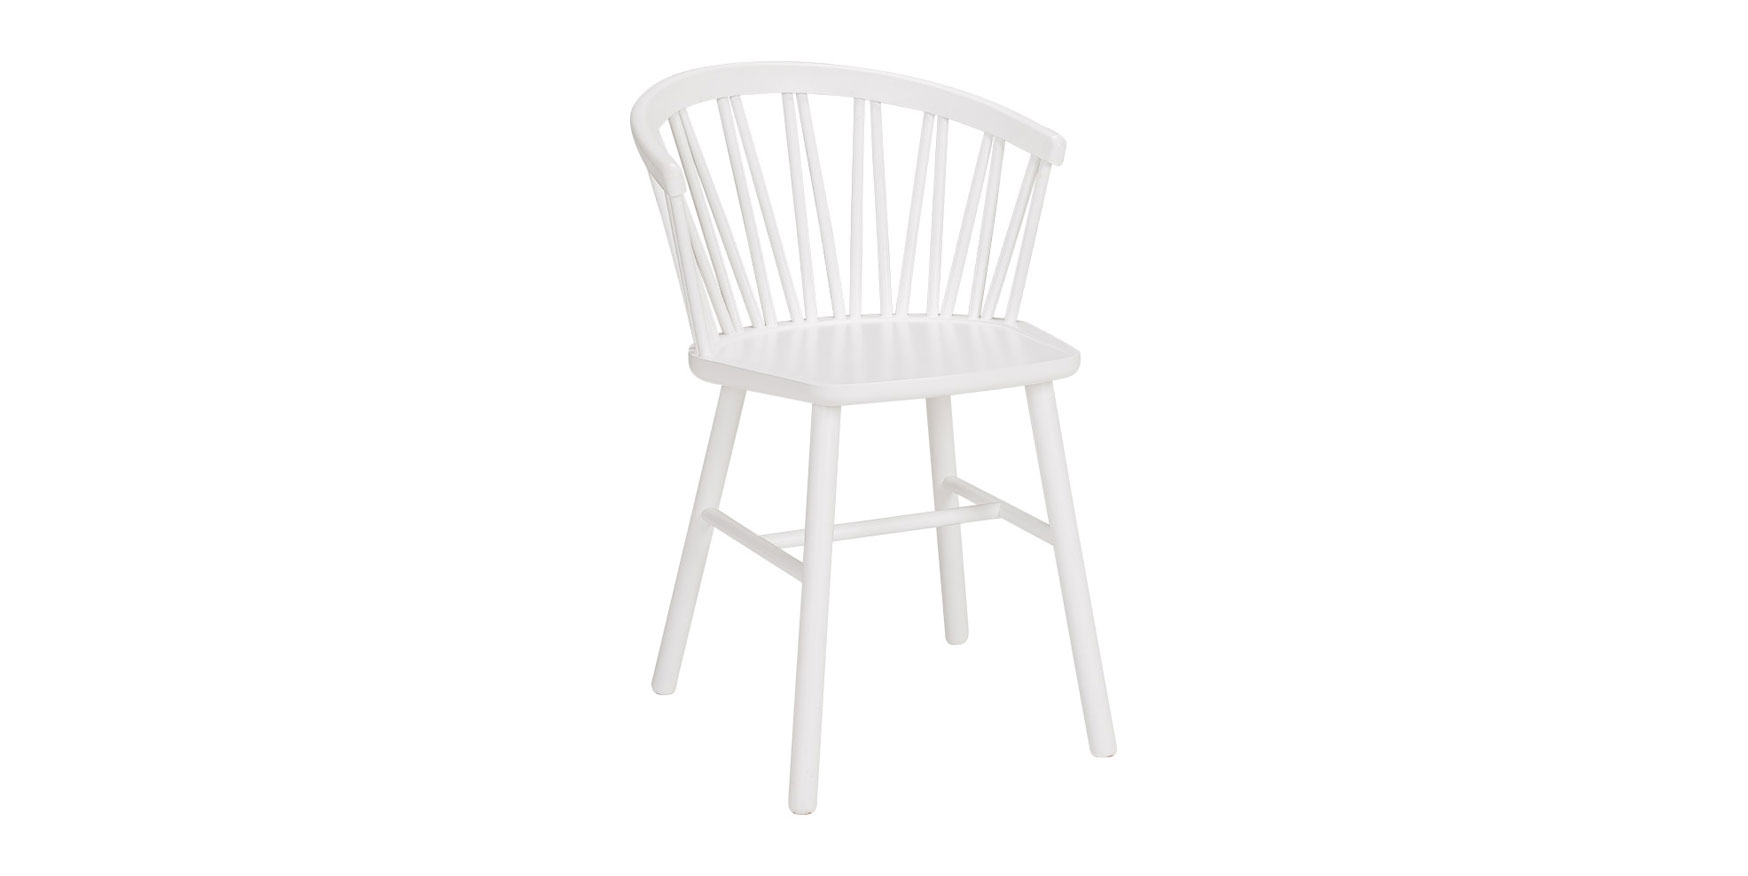 C10 Dining Chair Modern Nordic Wooden Chair Windsor Chair Solid Wood Chair